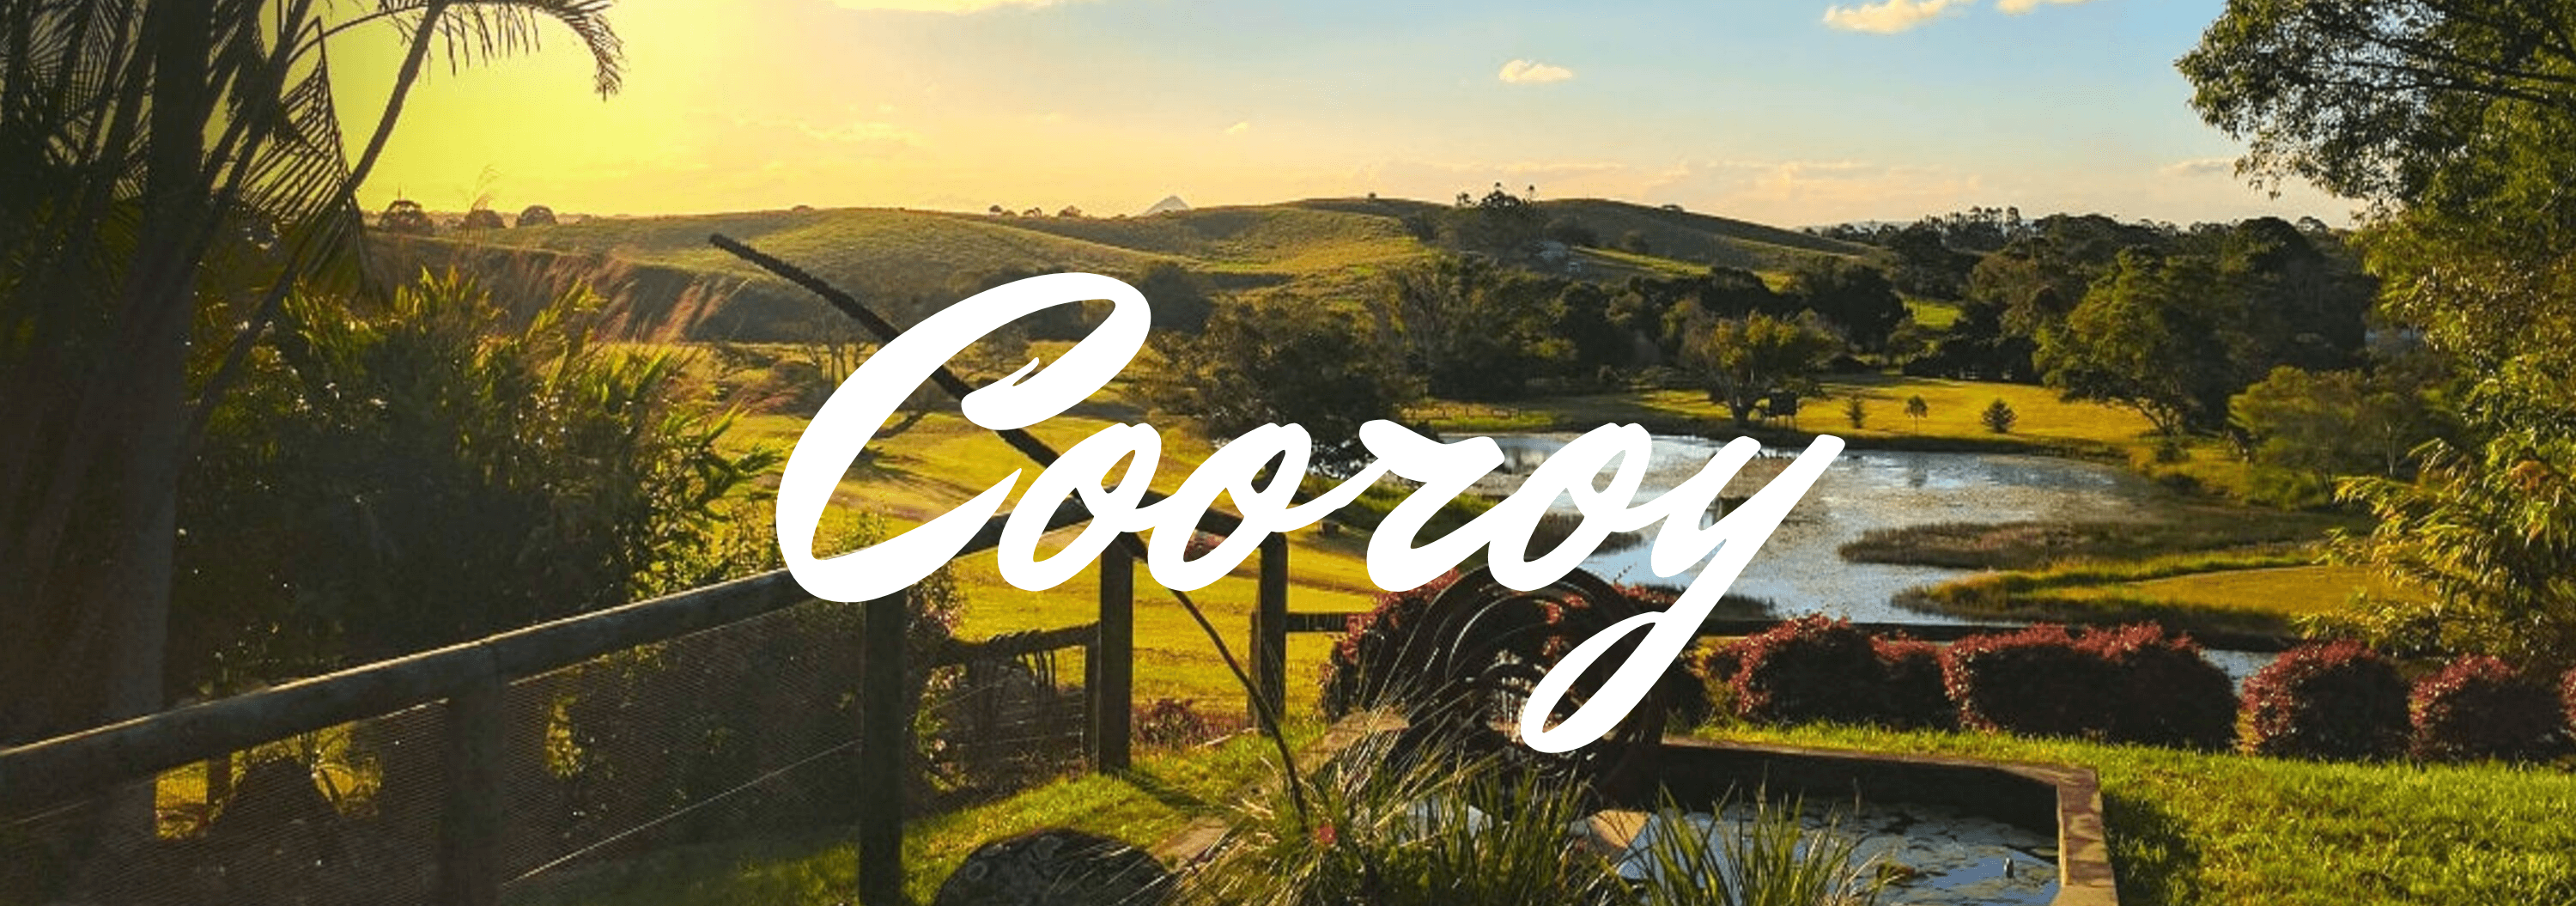 cooroy Banner